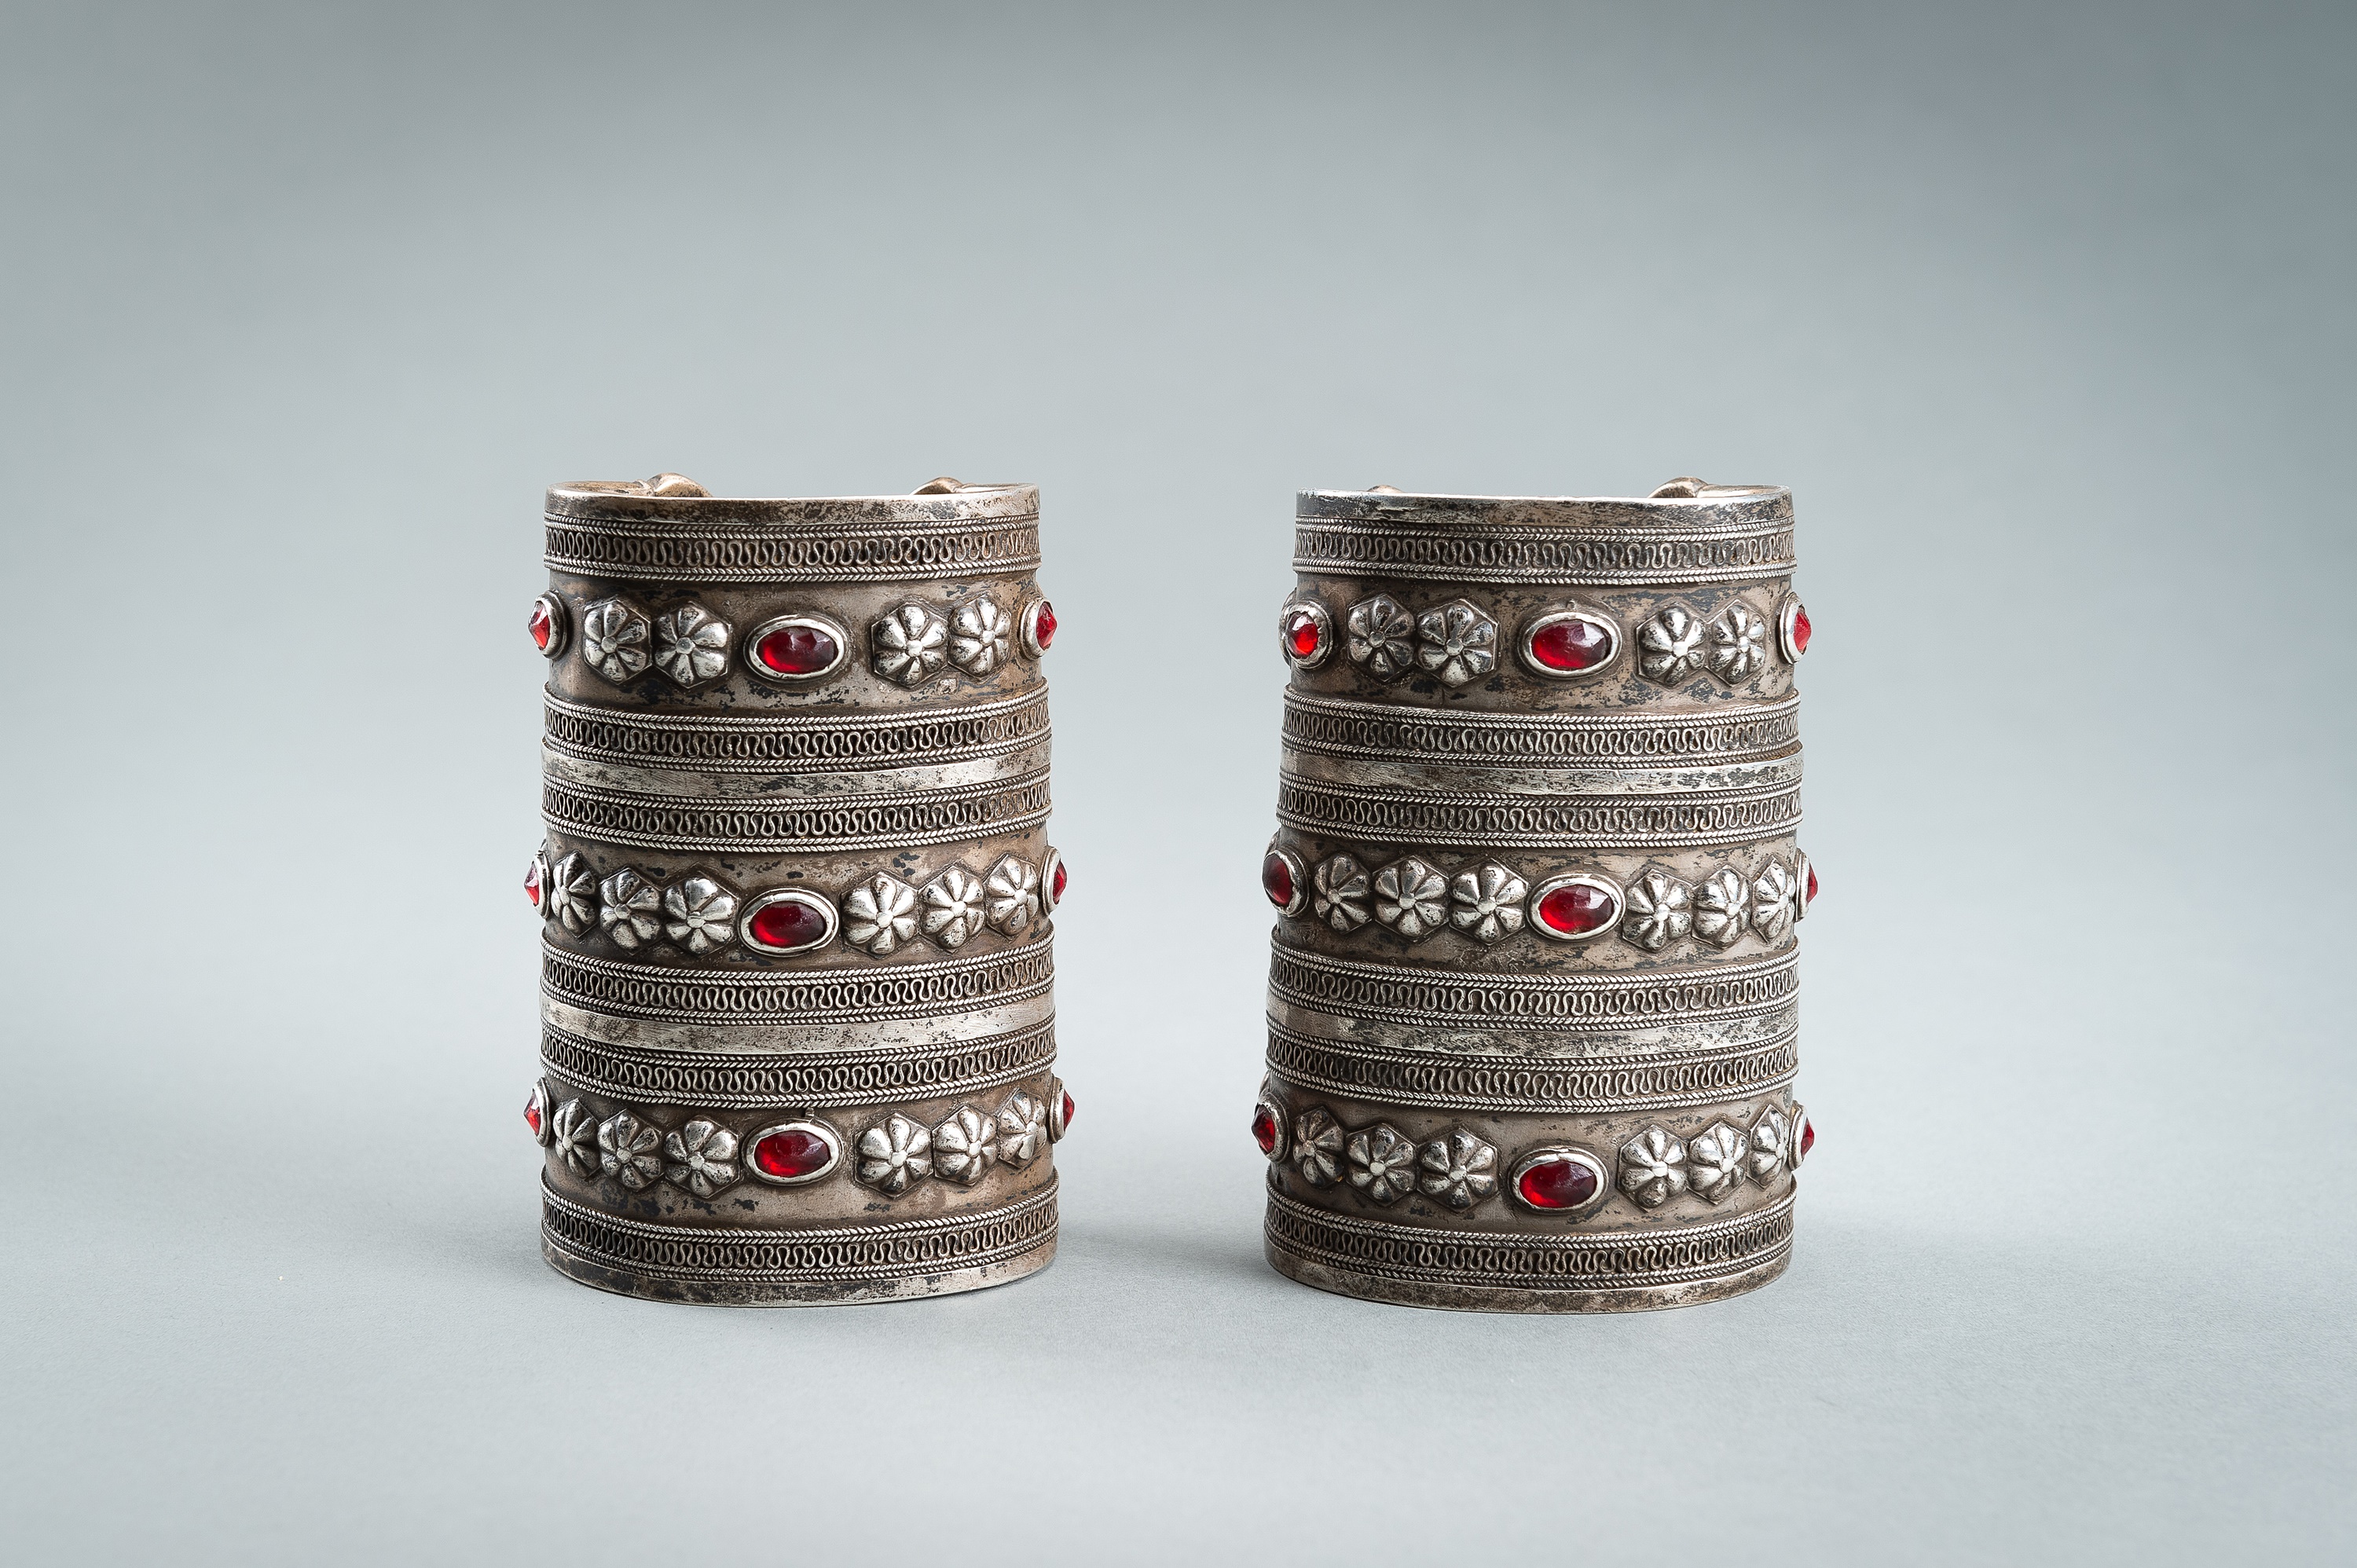 A PAIR OF TURKOMAN GLASS INSET SILVER BRACELETS, c. 1900s - Image 6 of 12